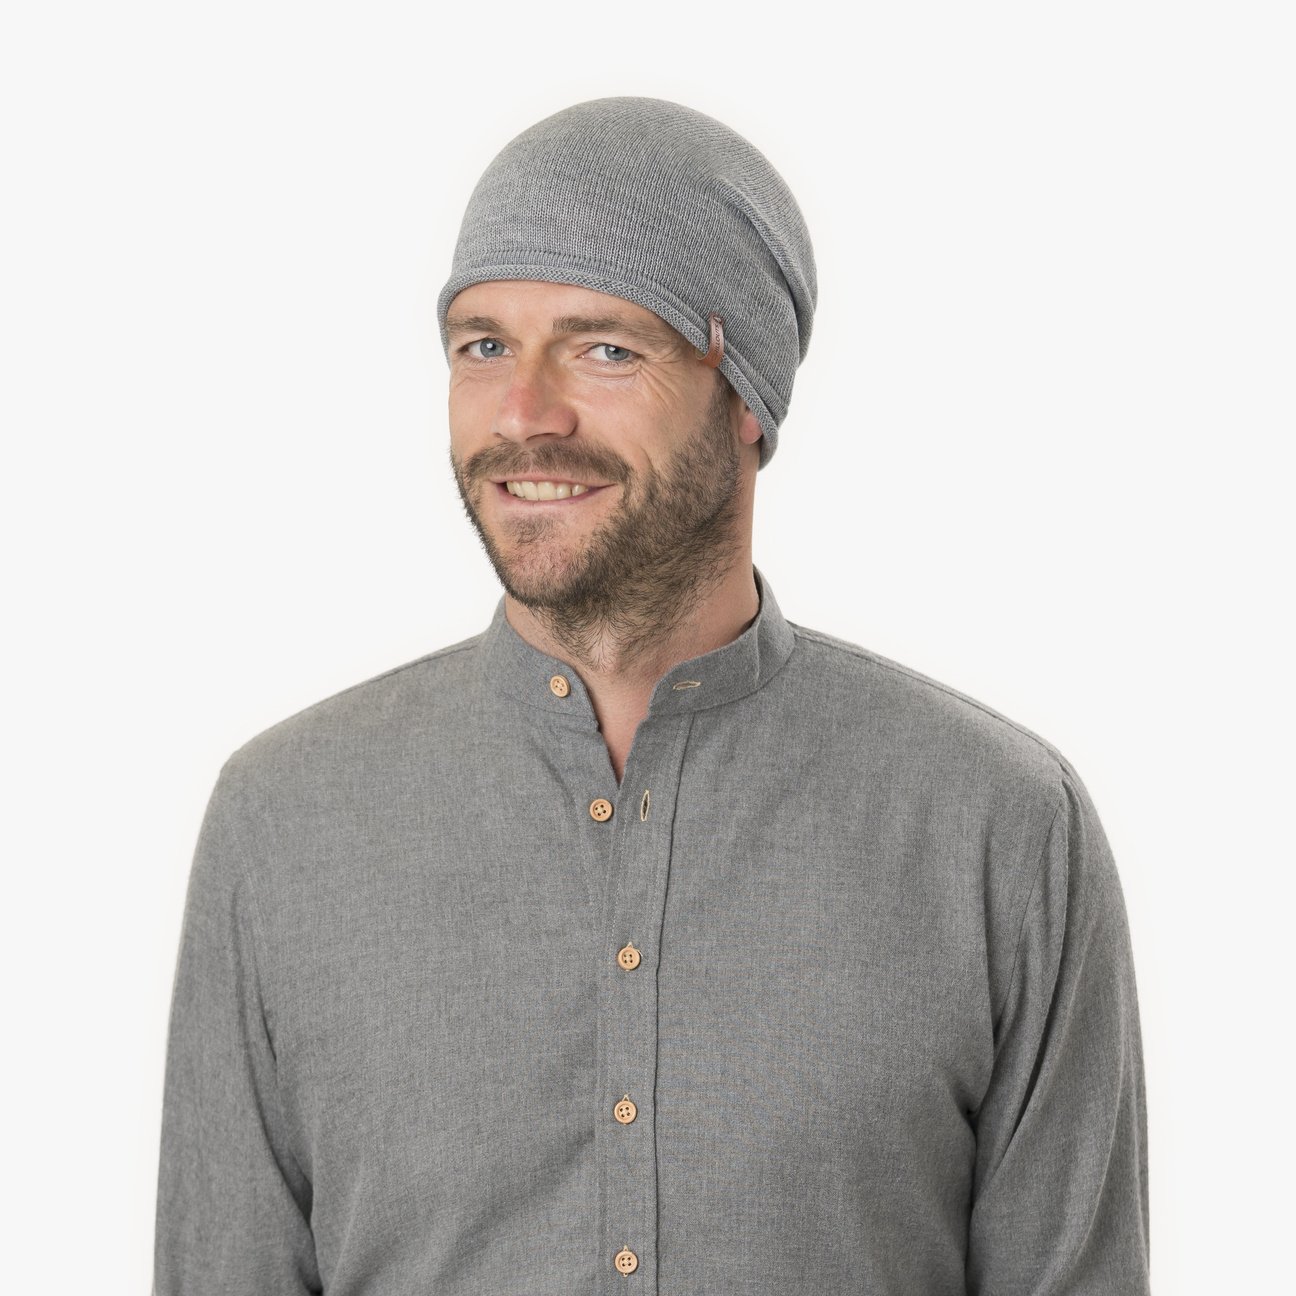 - € by Oversize Leicester 27,99 Beanie Chillouts